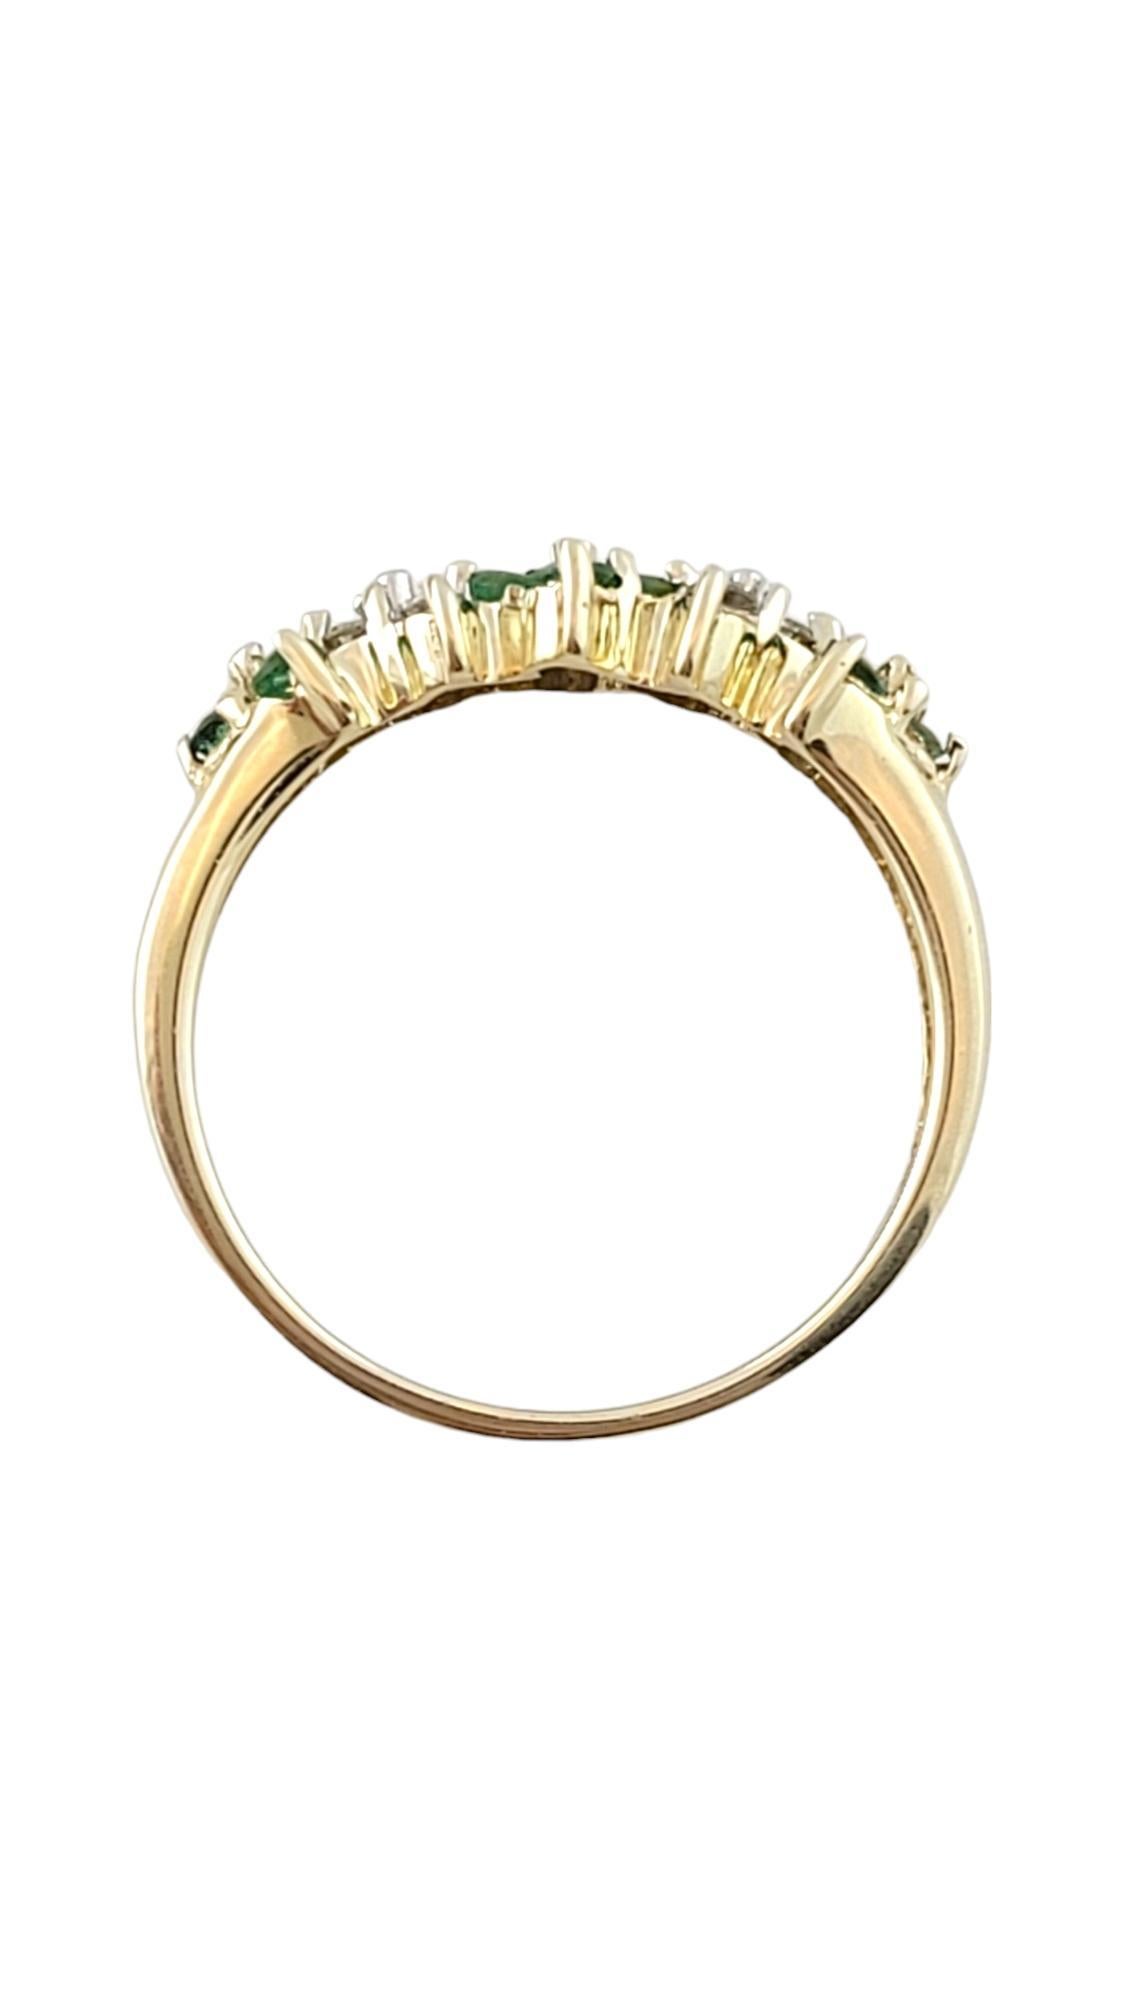 Brilliant Cut 10K Yellow Gold Natural Emerald and Diamond Ring Size 7-7.25 #16425